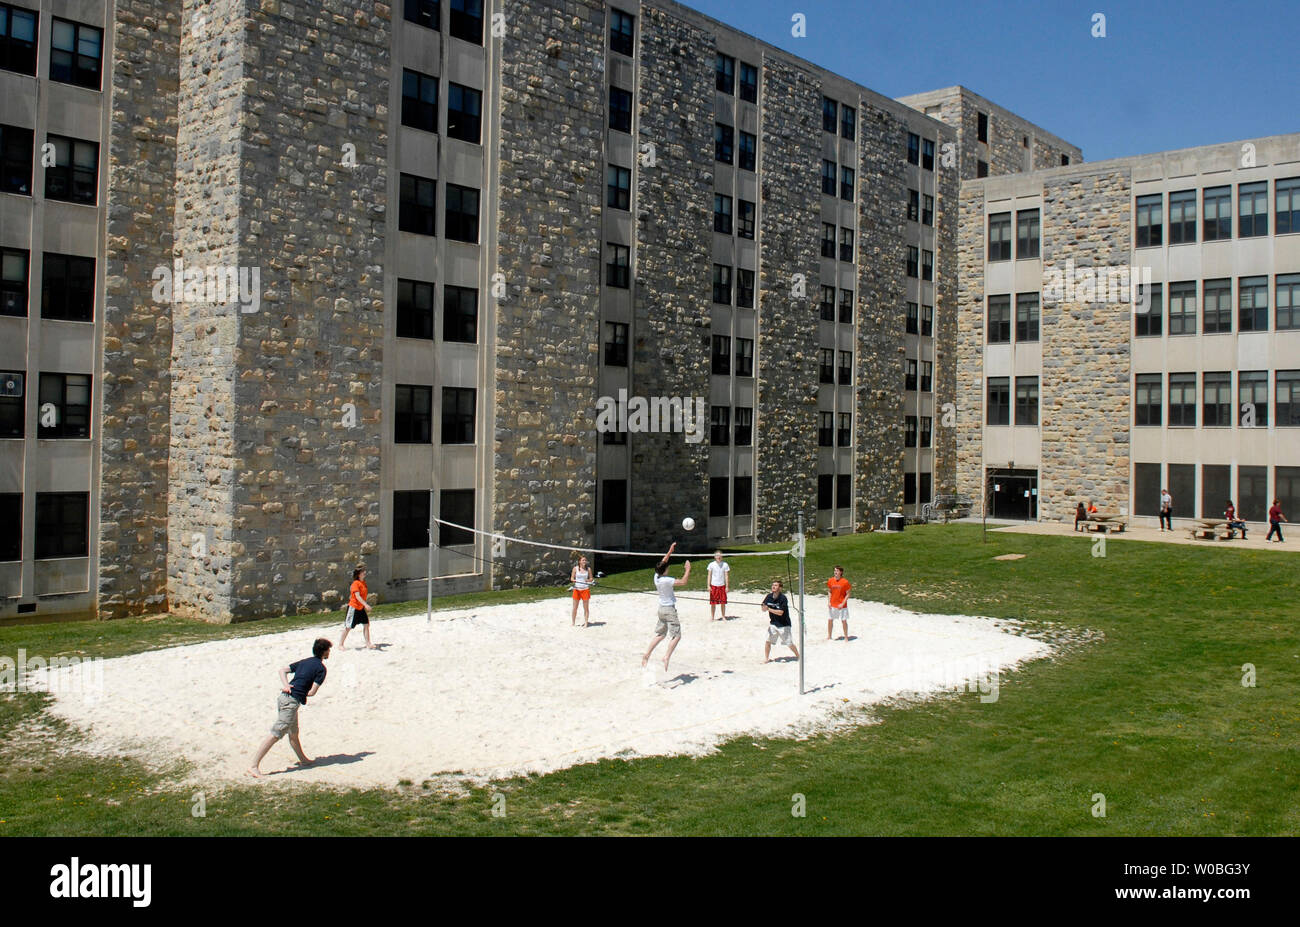 Virginia Tech students play volleyball in the quad at West Ambler Johnston Hall, on the campus of Virginia Tech in Blacksburg, Virginia on April 23, 2007. It has been a week since Cho Seung-Hui, a student at Virginia Tech, started his deadly shooting spree at West Ambler that killed 32 people on April 16, 2007. Today was the first day of classes since the shooting. (UPI Photo/Kevin Dietsch) Stock Photo